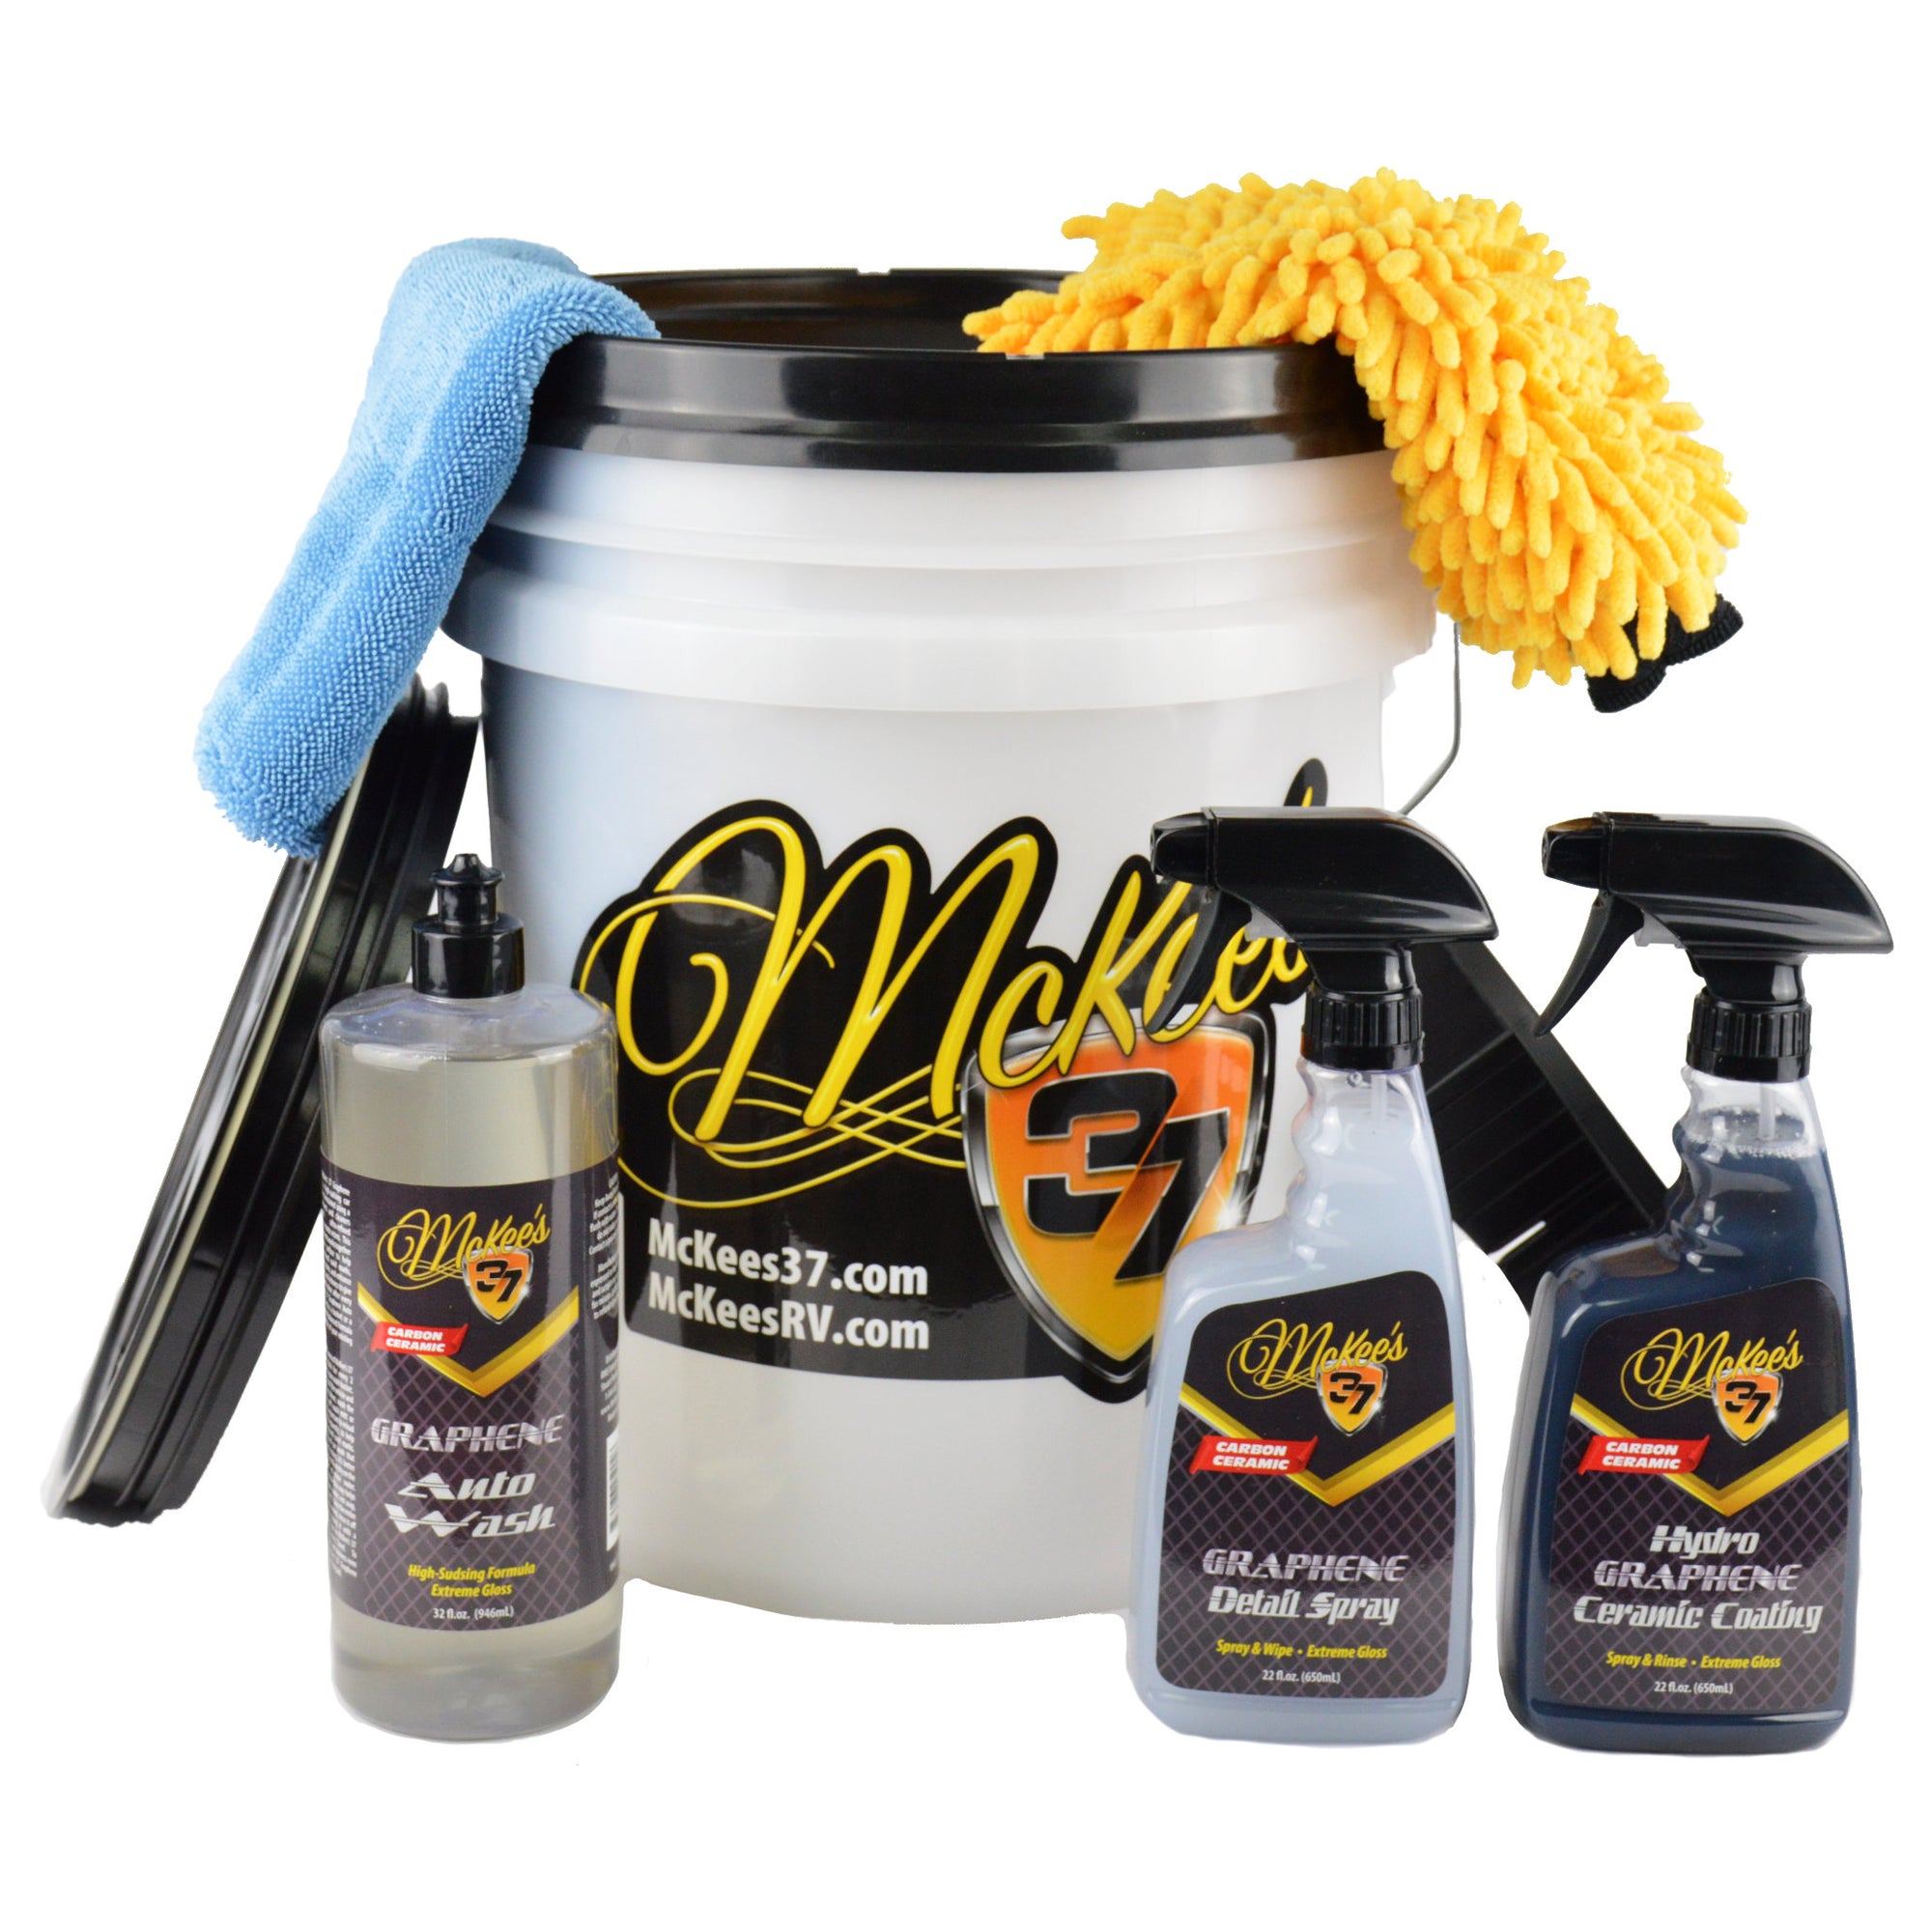 Wash Bucket System with Dolly – Supreme Auto shop